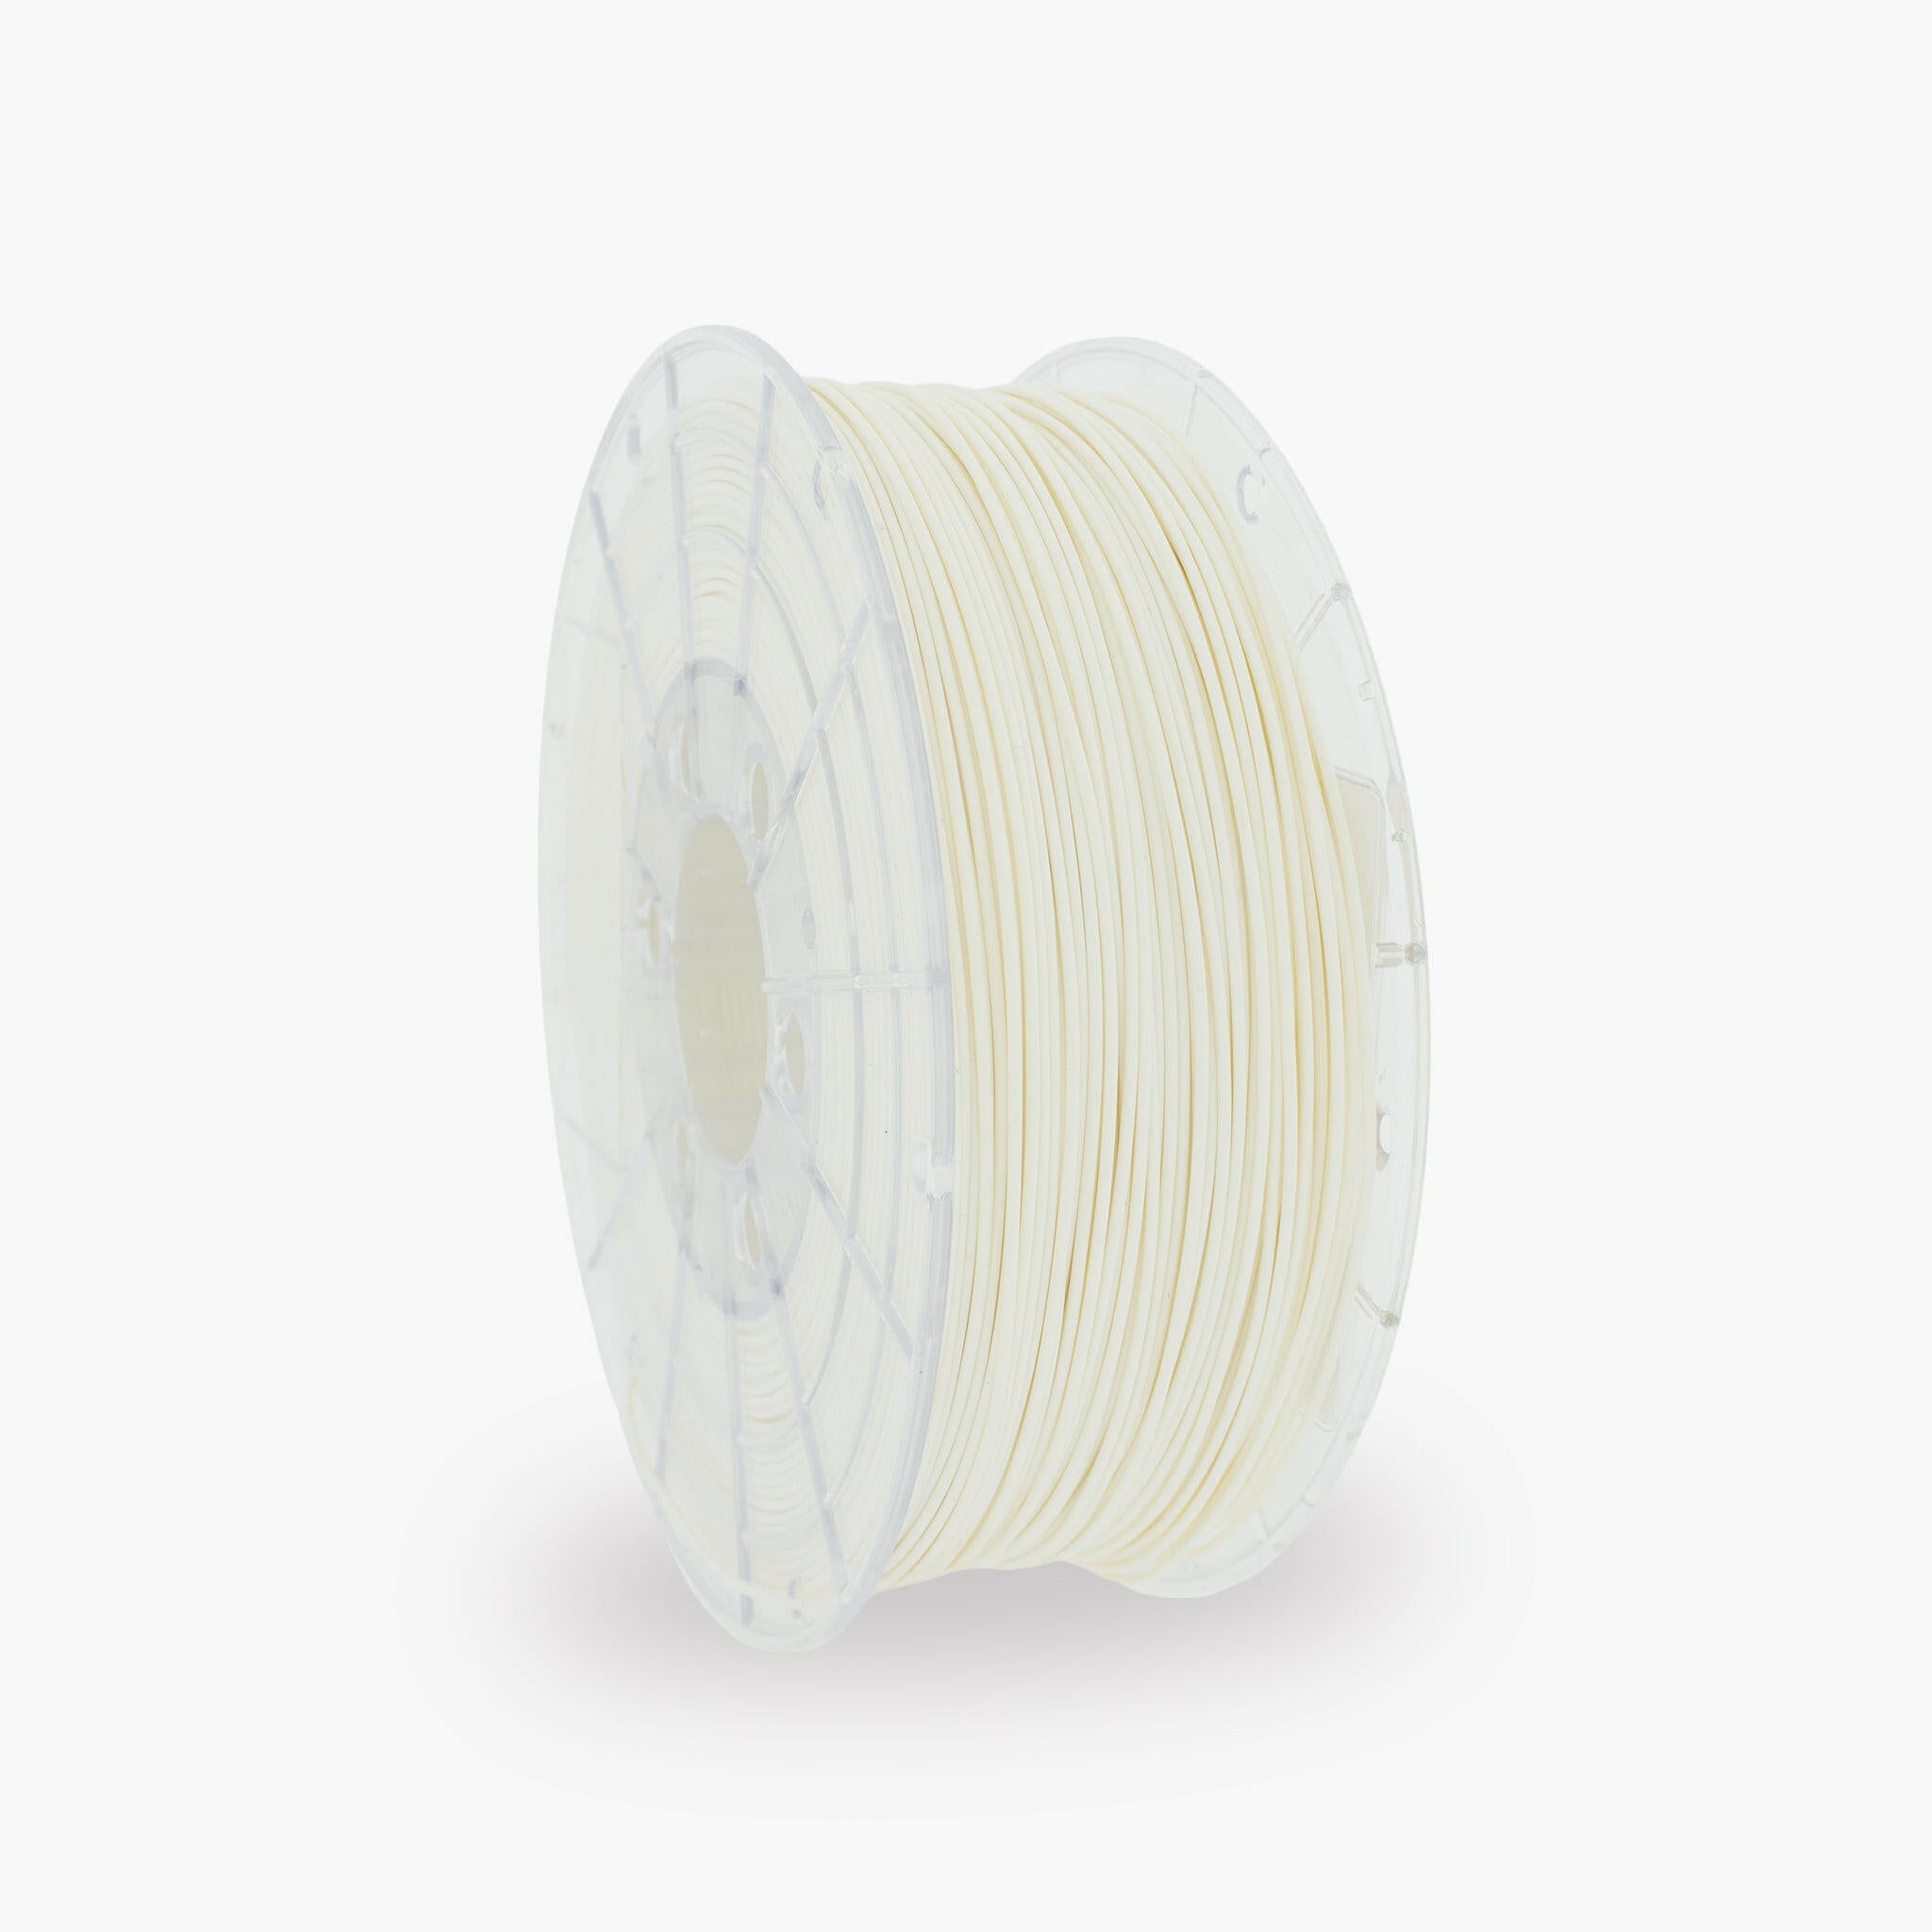 Pure White PLA 3D Printer Filament with a diameter of 1.75mm on a 1KG Spool.